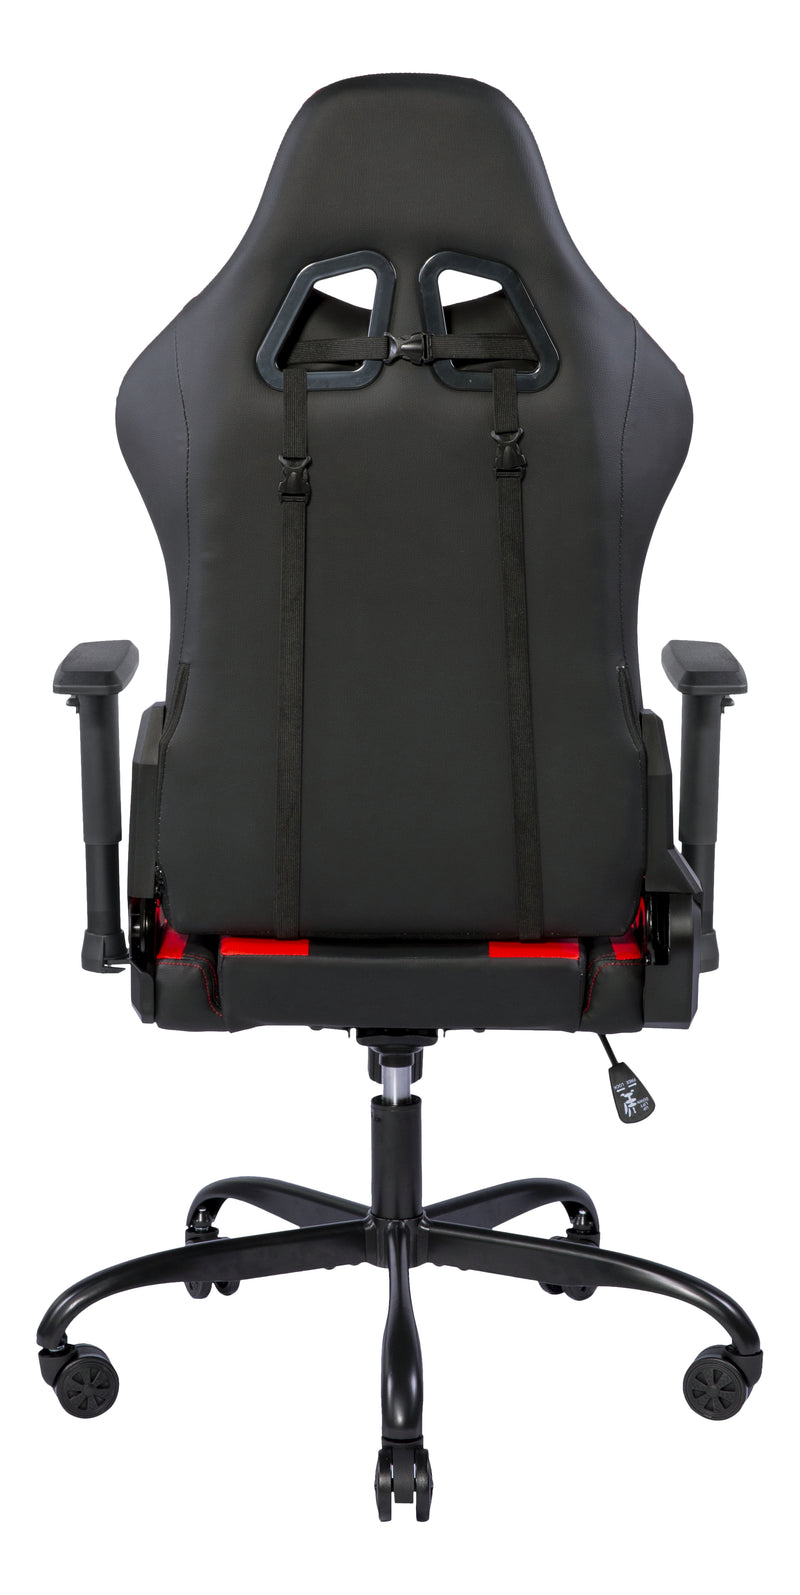 Deltaco Gaming DC210R Gaming Chair, PU-leather, iron frame - Black/Red